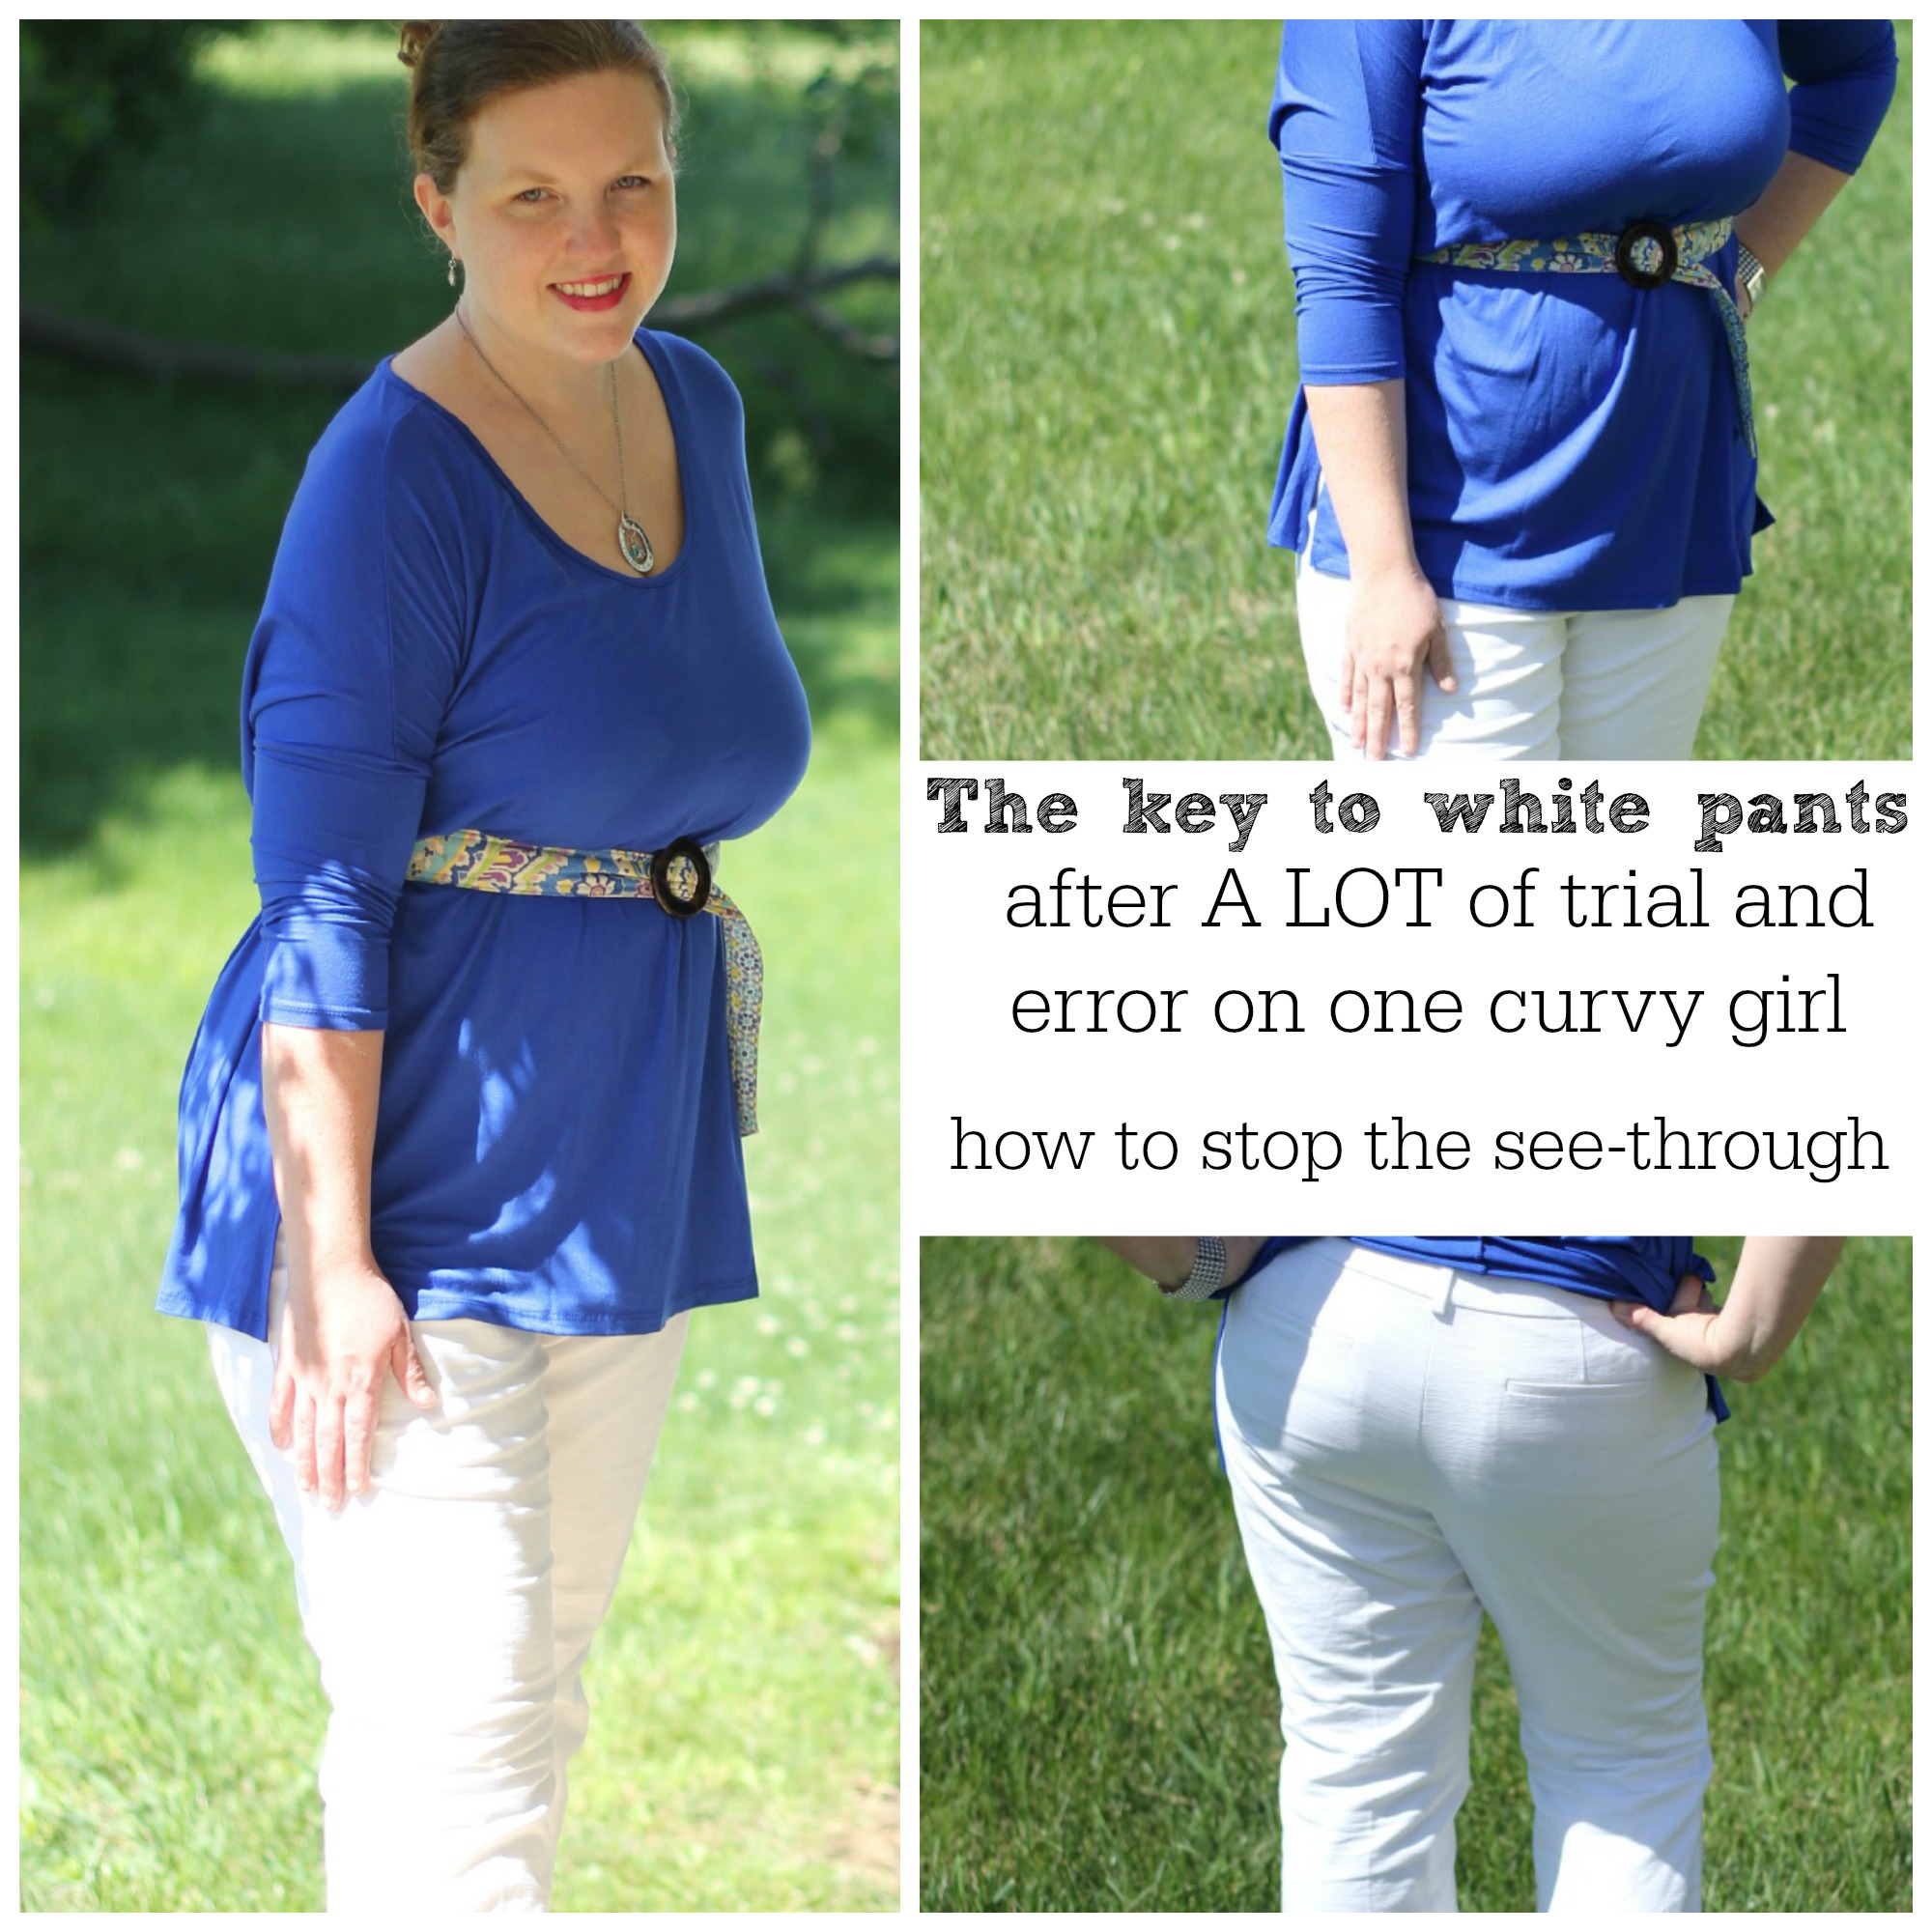 How to deal with white see-through pants - Quora